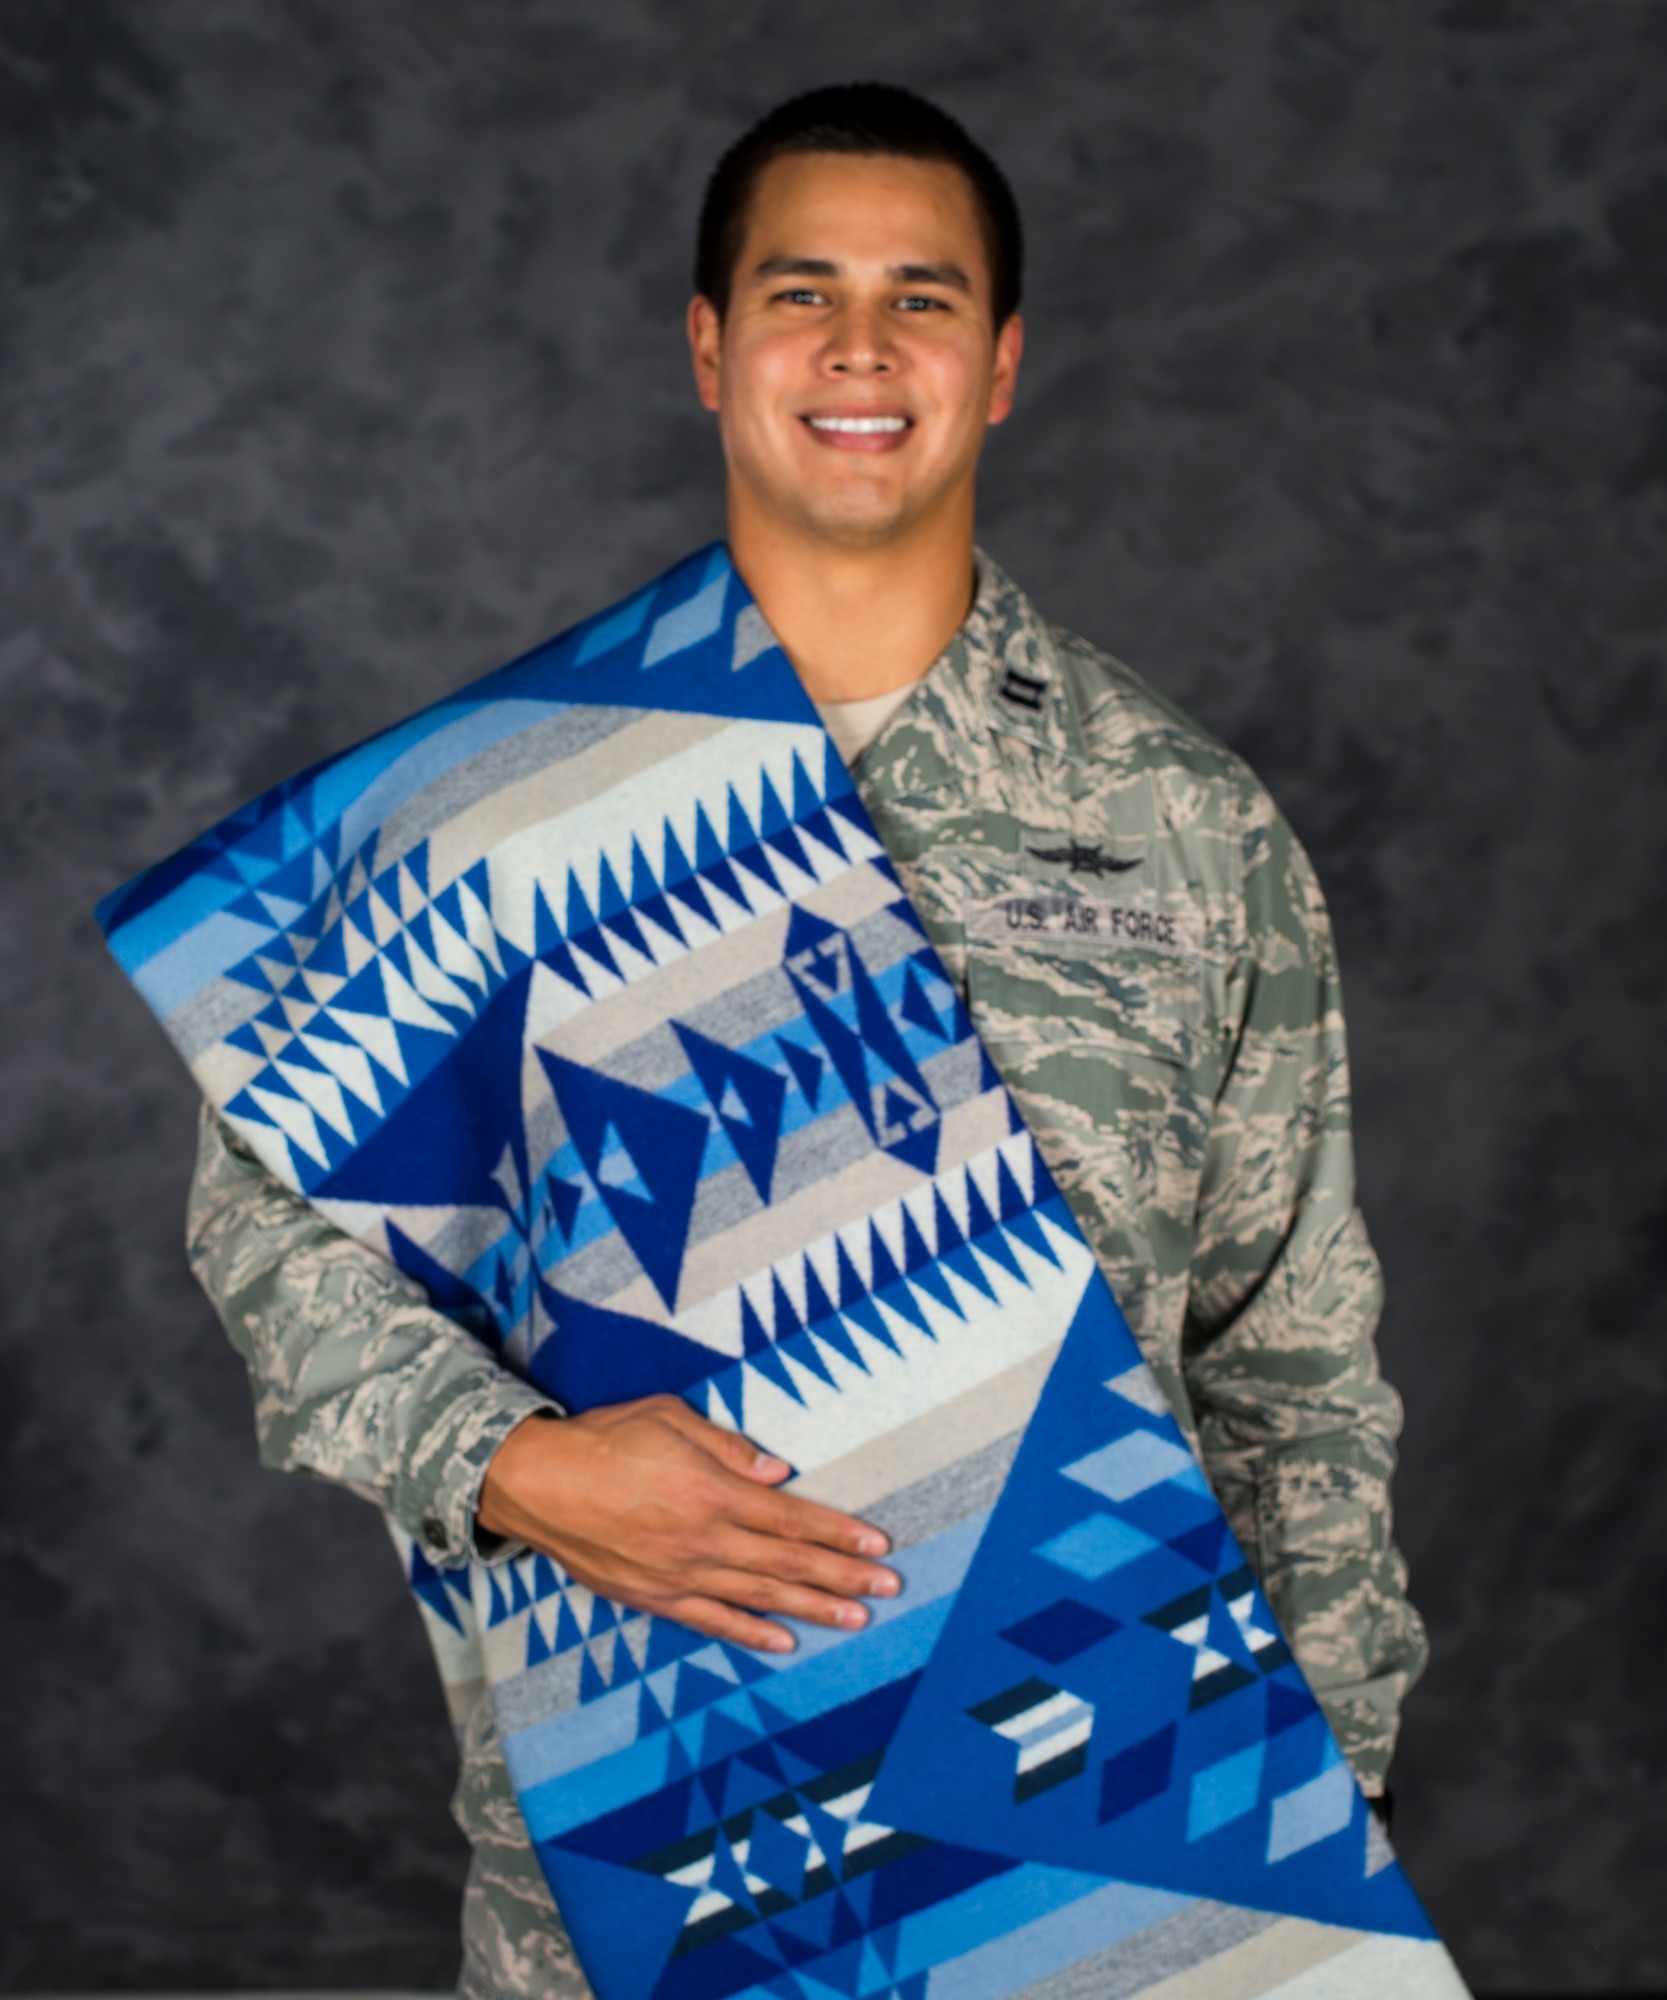 U.S. Air Force Capt. Myles Morales, 336th Recruiting Squadron support flight commander, poses for a photo with his pendleton quilt Dec. 3, 2014, at Moody Air Force Base, Ga. Morales’ native name is Wanbli Kinyan Gli and it translates to ‘the eagle flies home.’ (U.S. Air Force photo by Airman 1st Class Ceaira Tinsley/Released)